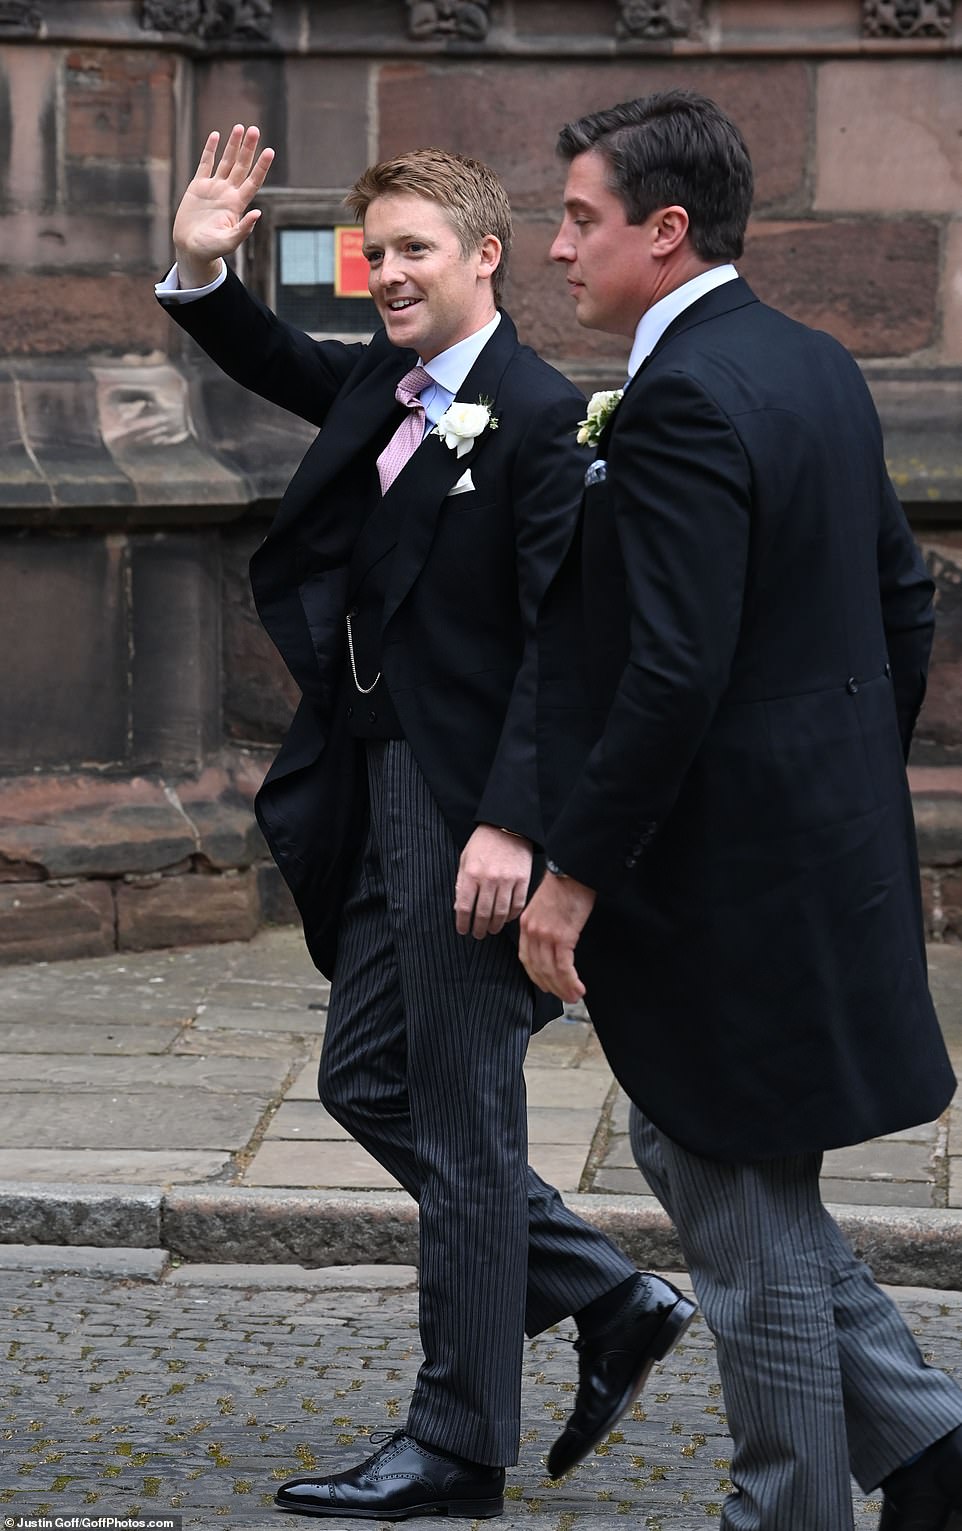 The groom, Hugh Grosvenor (left), arriving at Chester Cathedral for his wedding to Olivia Henson